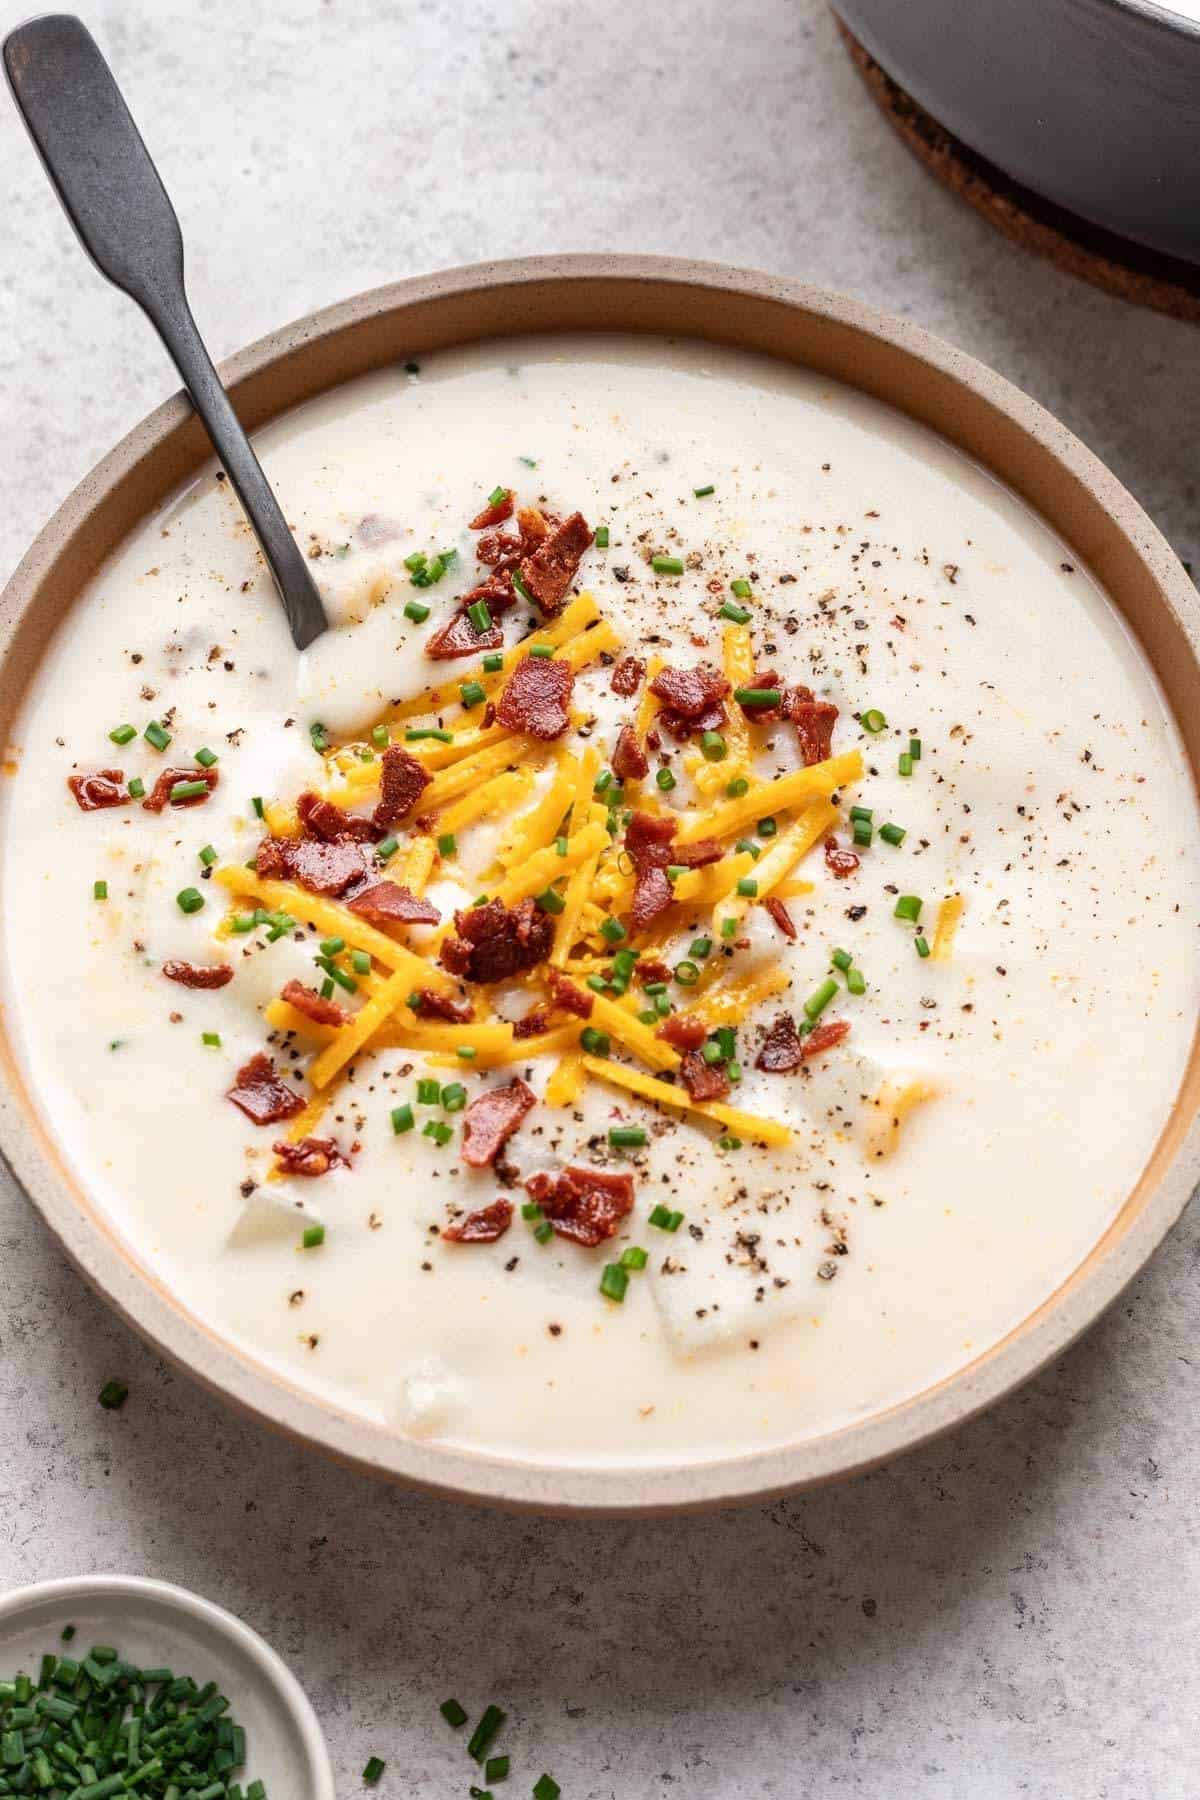 Bowl of vegan potato soup garnished with chives, cheddar cheese, and vegan bacon bits.